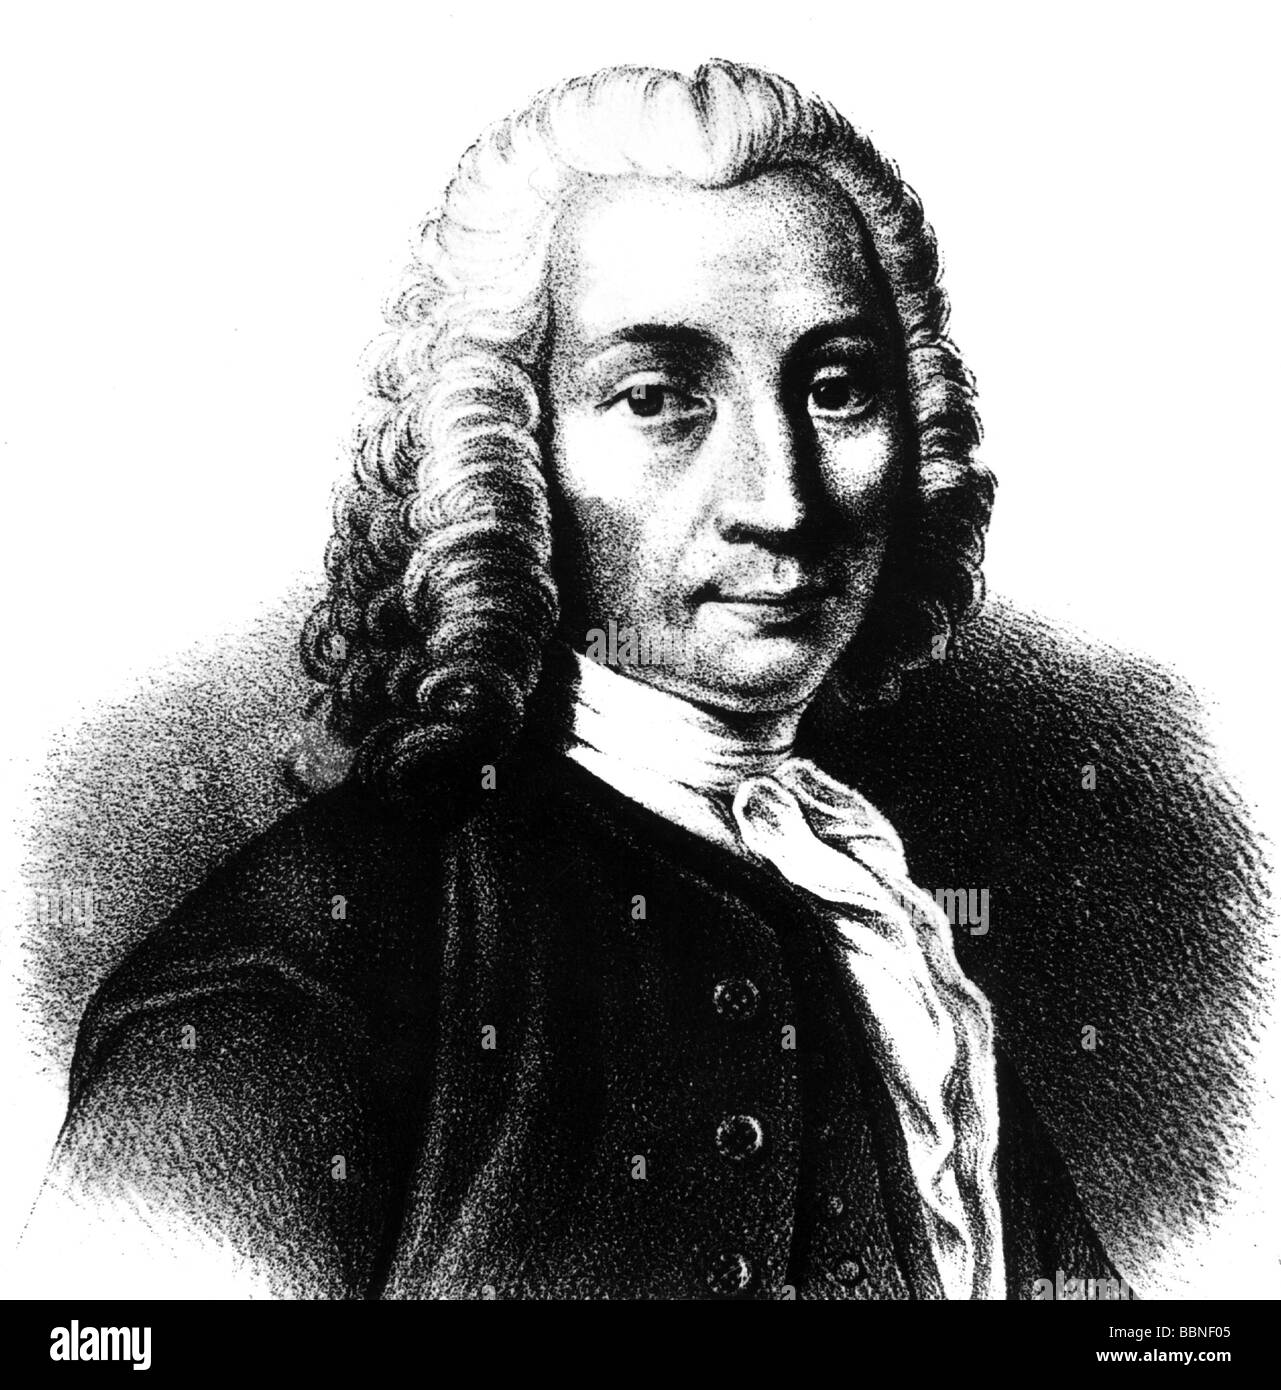 Celsius, Anders 27.11.1701 - 25.4.1744, Swedish astronomer, portrait, lithograph, 18th century, Stock Photo